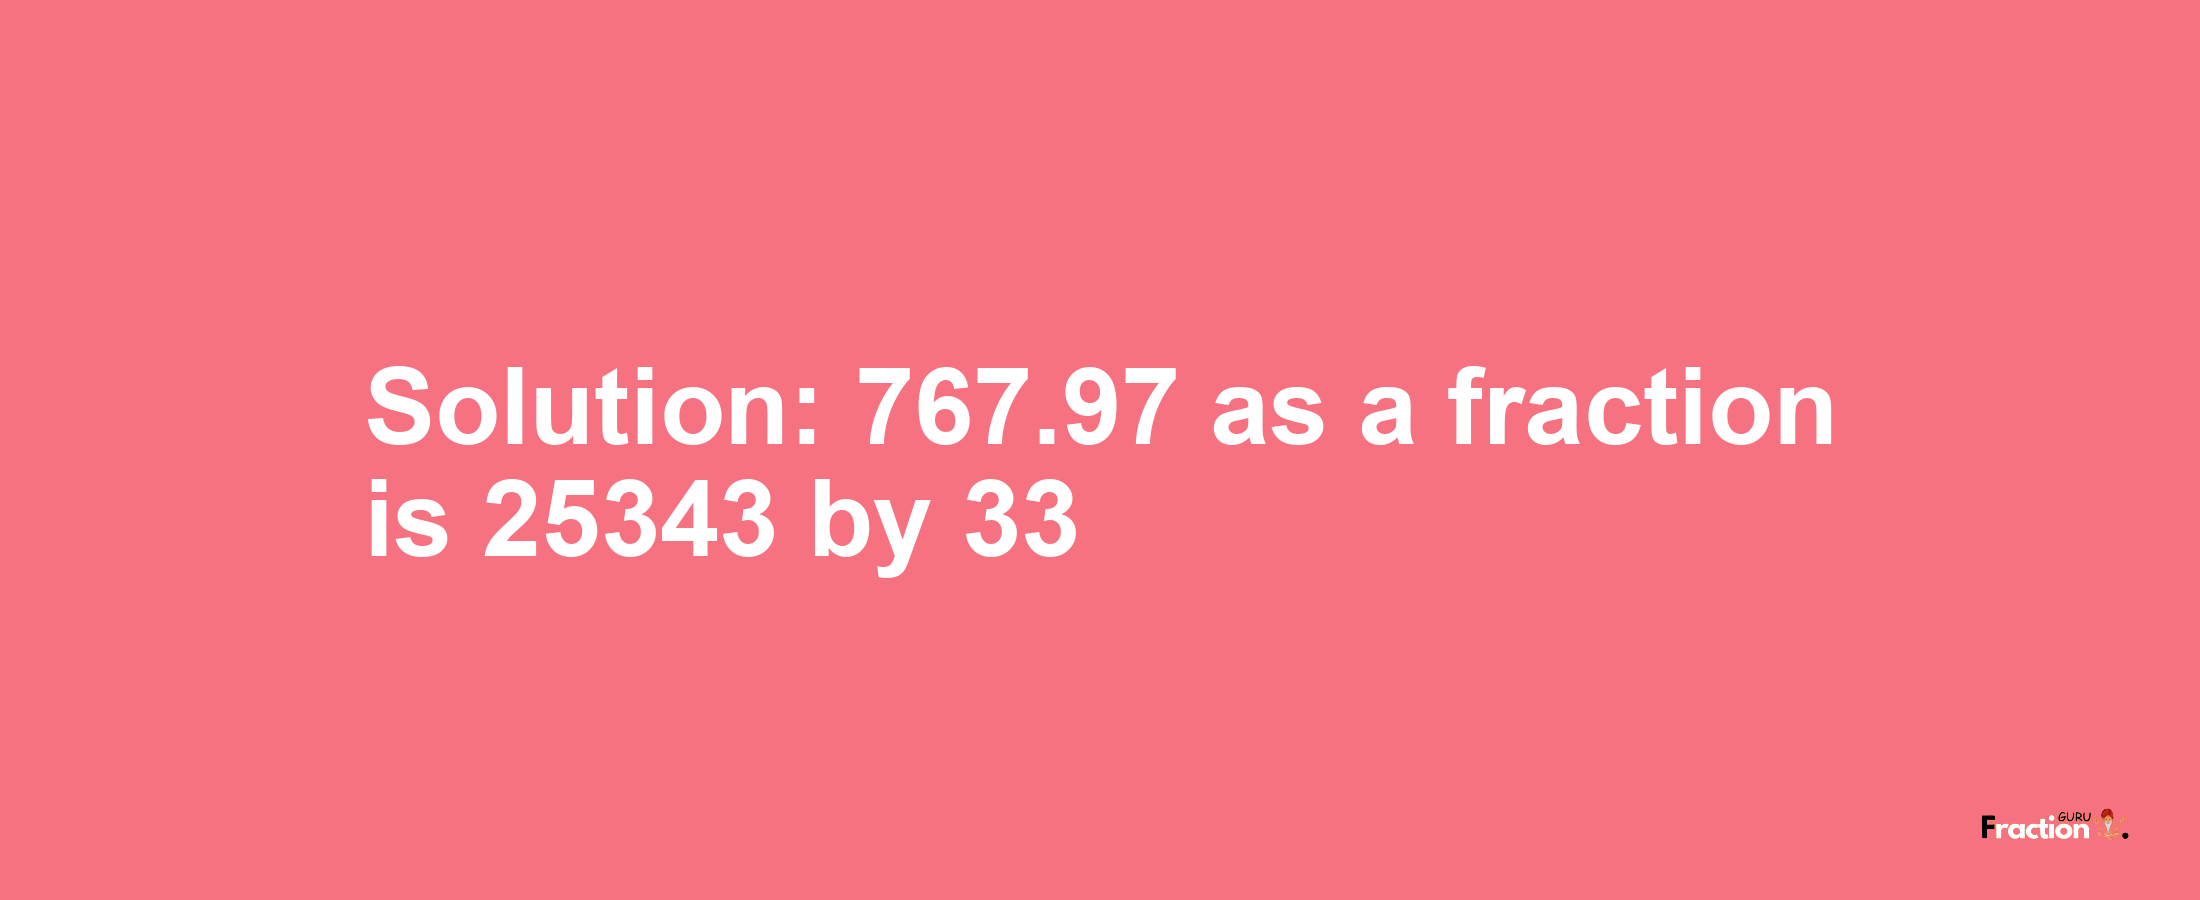 Solution:767.97 as a fraction is 25343/33